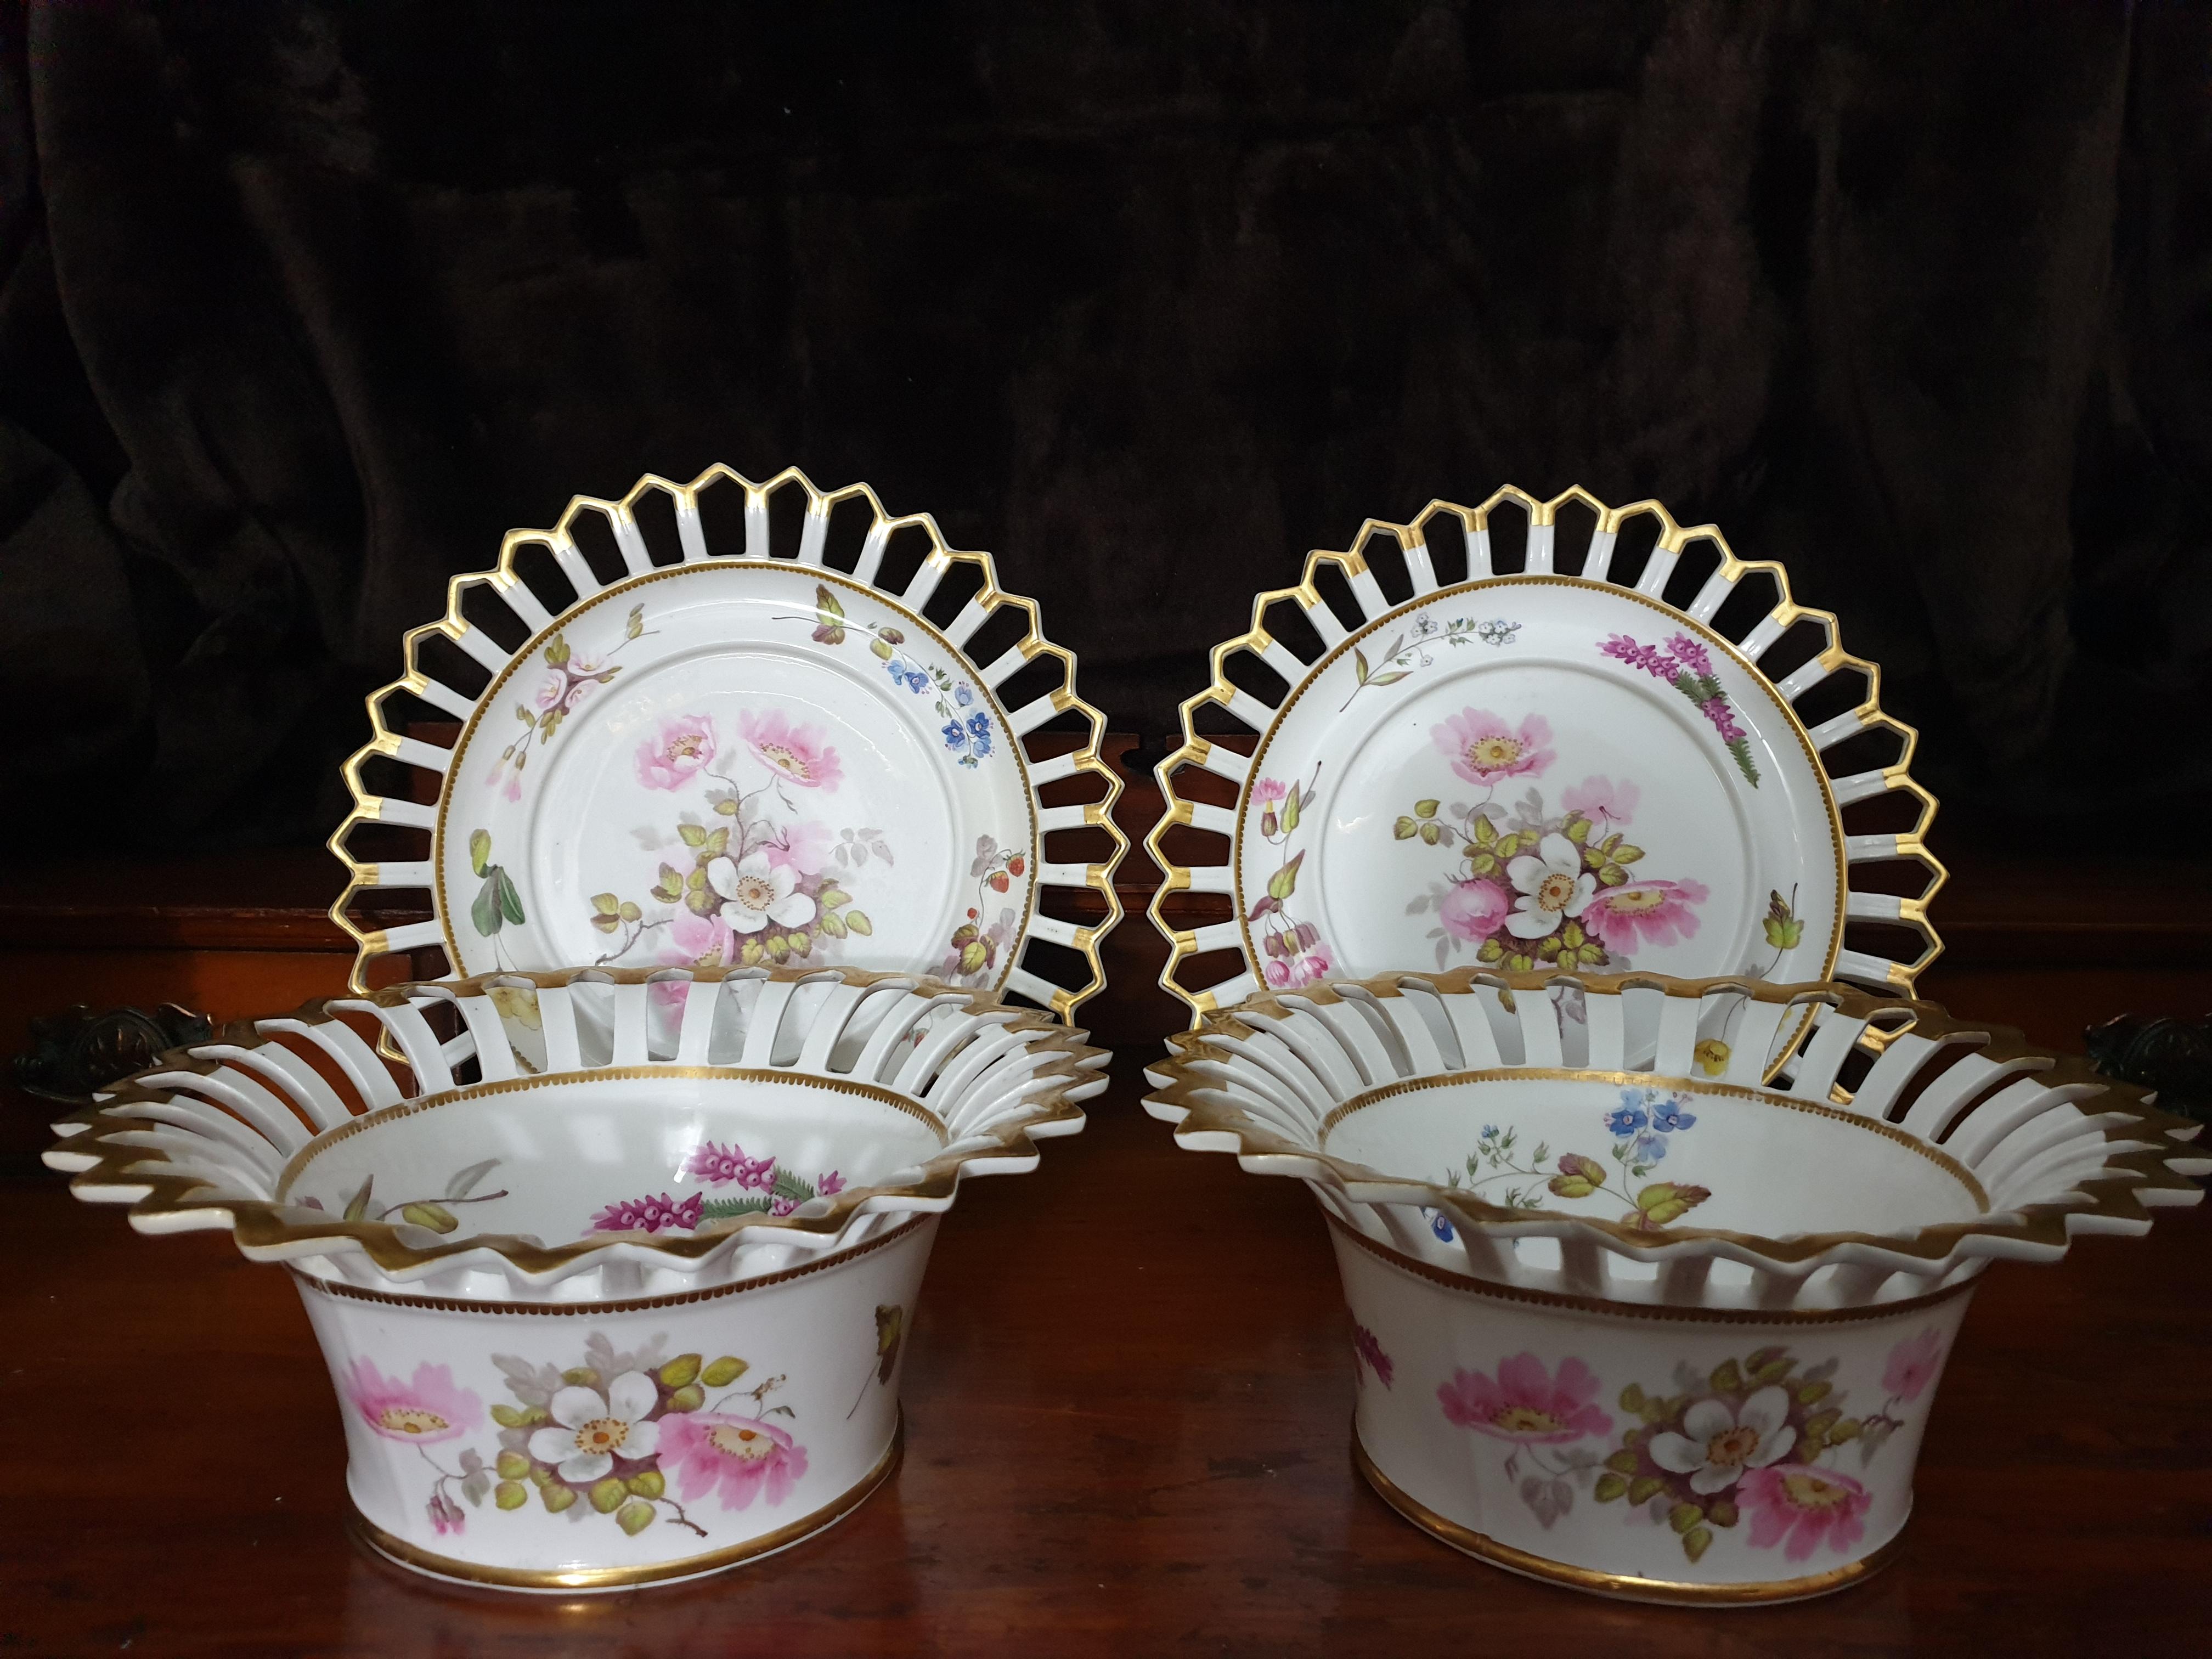 H & R Daniel Ice Pail Reticulated Fruit Bowls or Stands By William Pollard For Sale 5